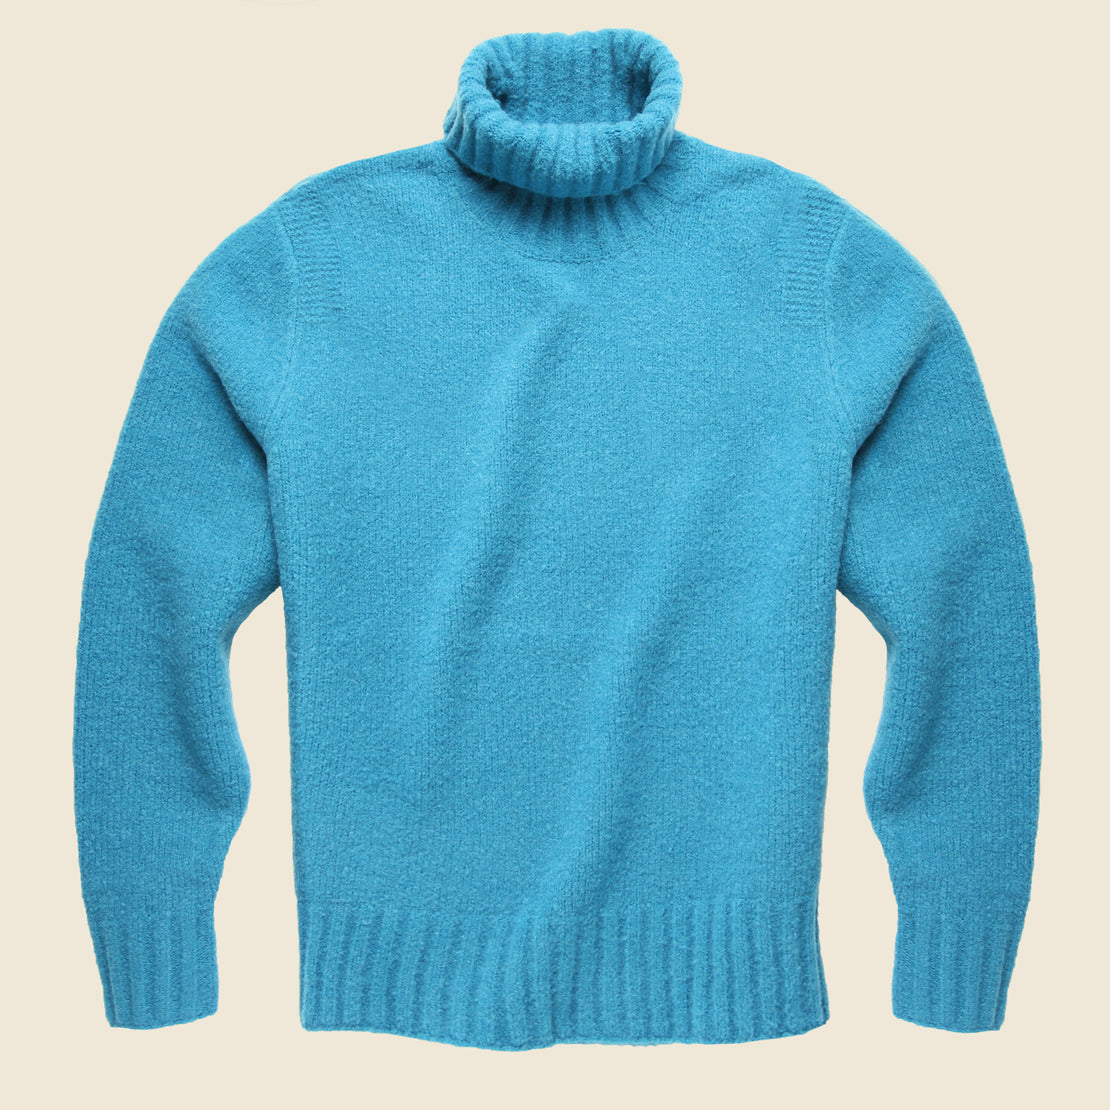 Todd Snyder Chunky Turtleneck Sweater - Turquoise